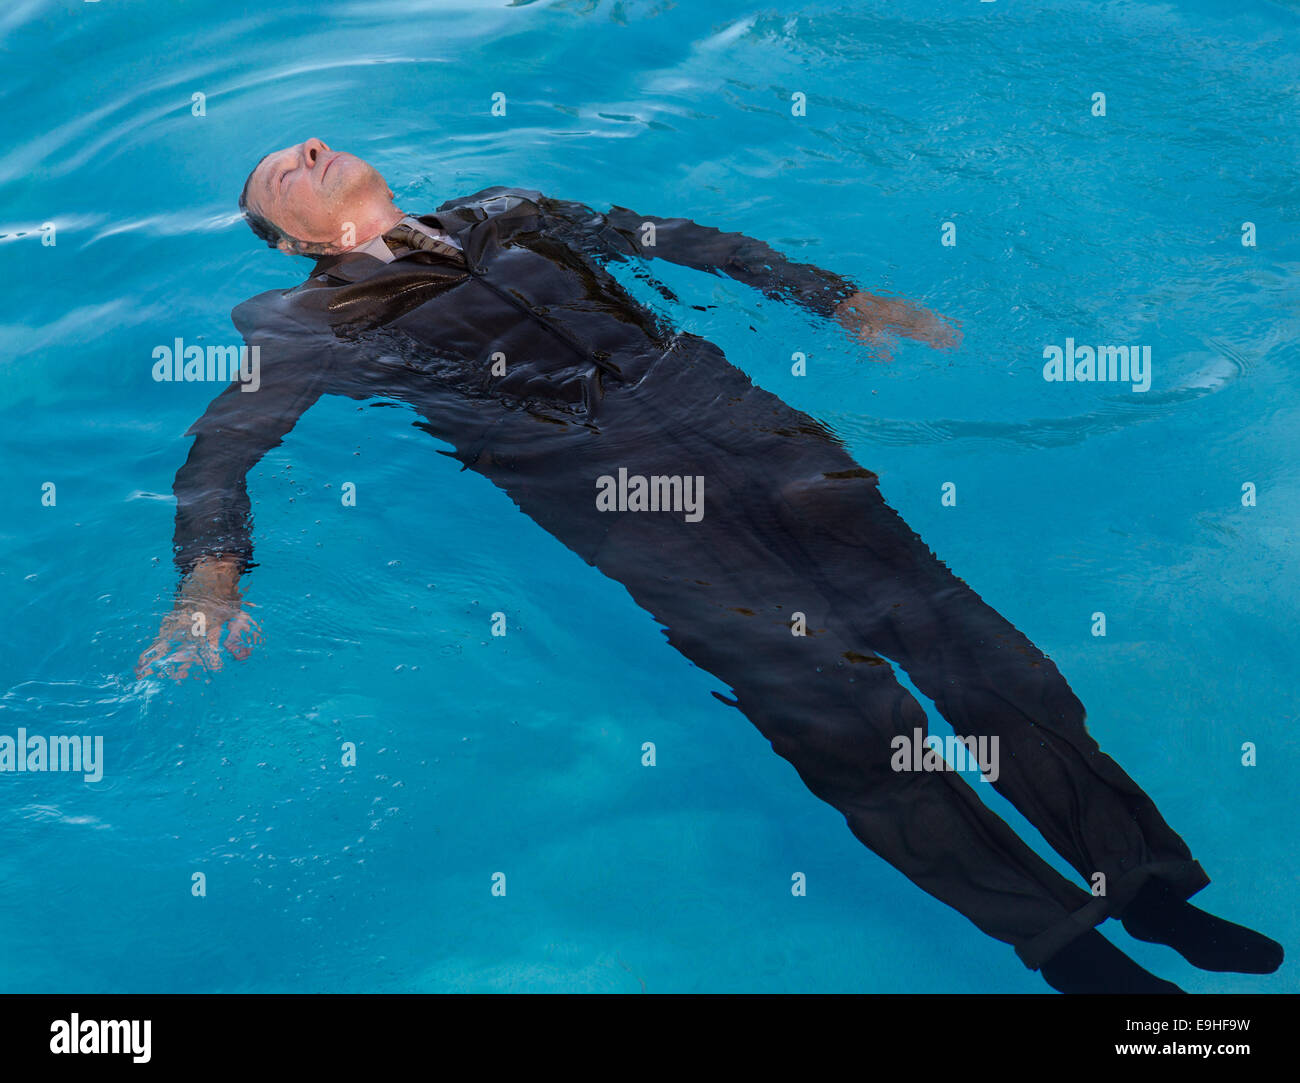 Senior man floating on back in water Stock Photo